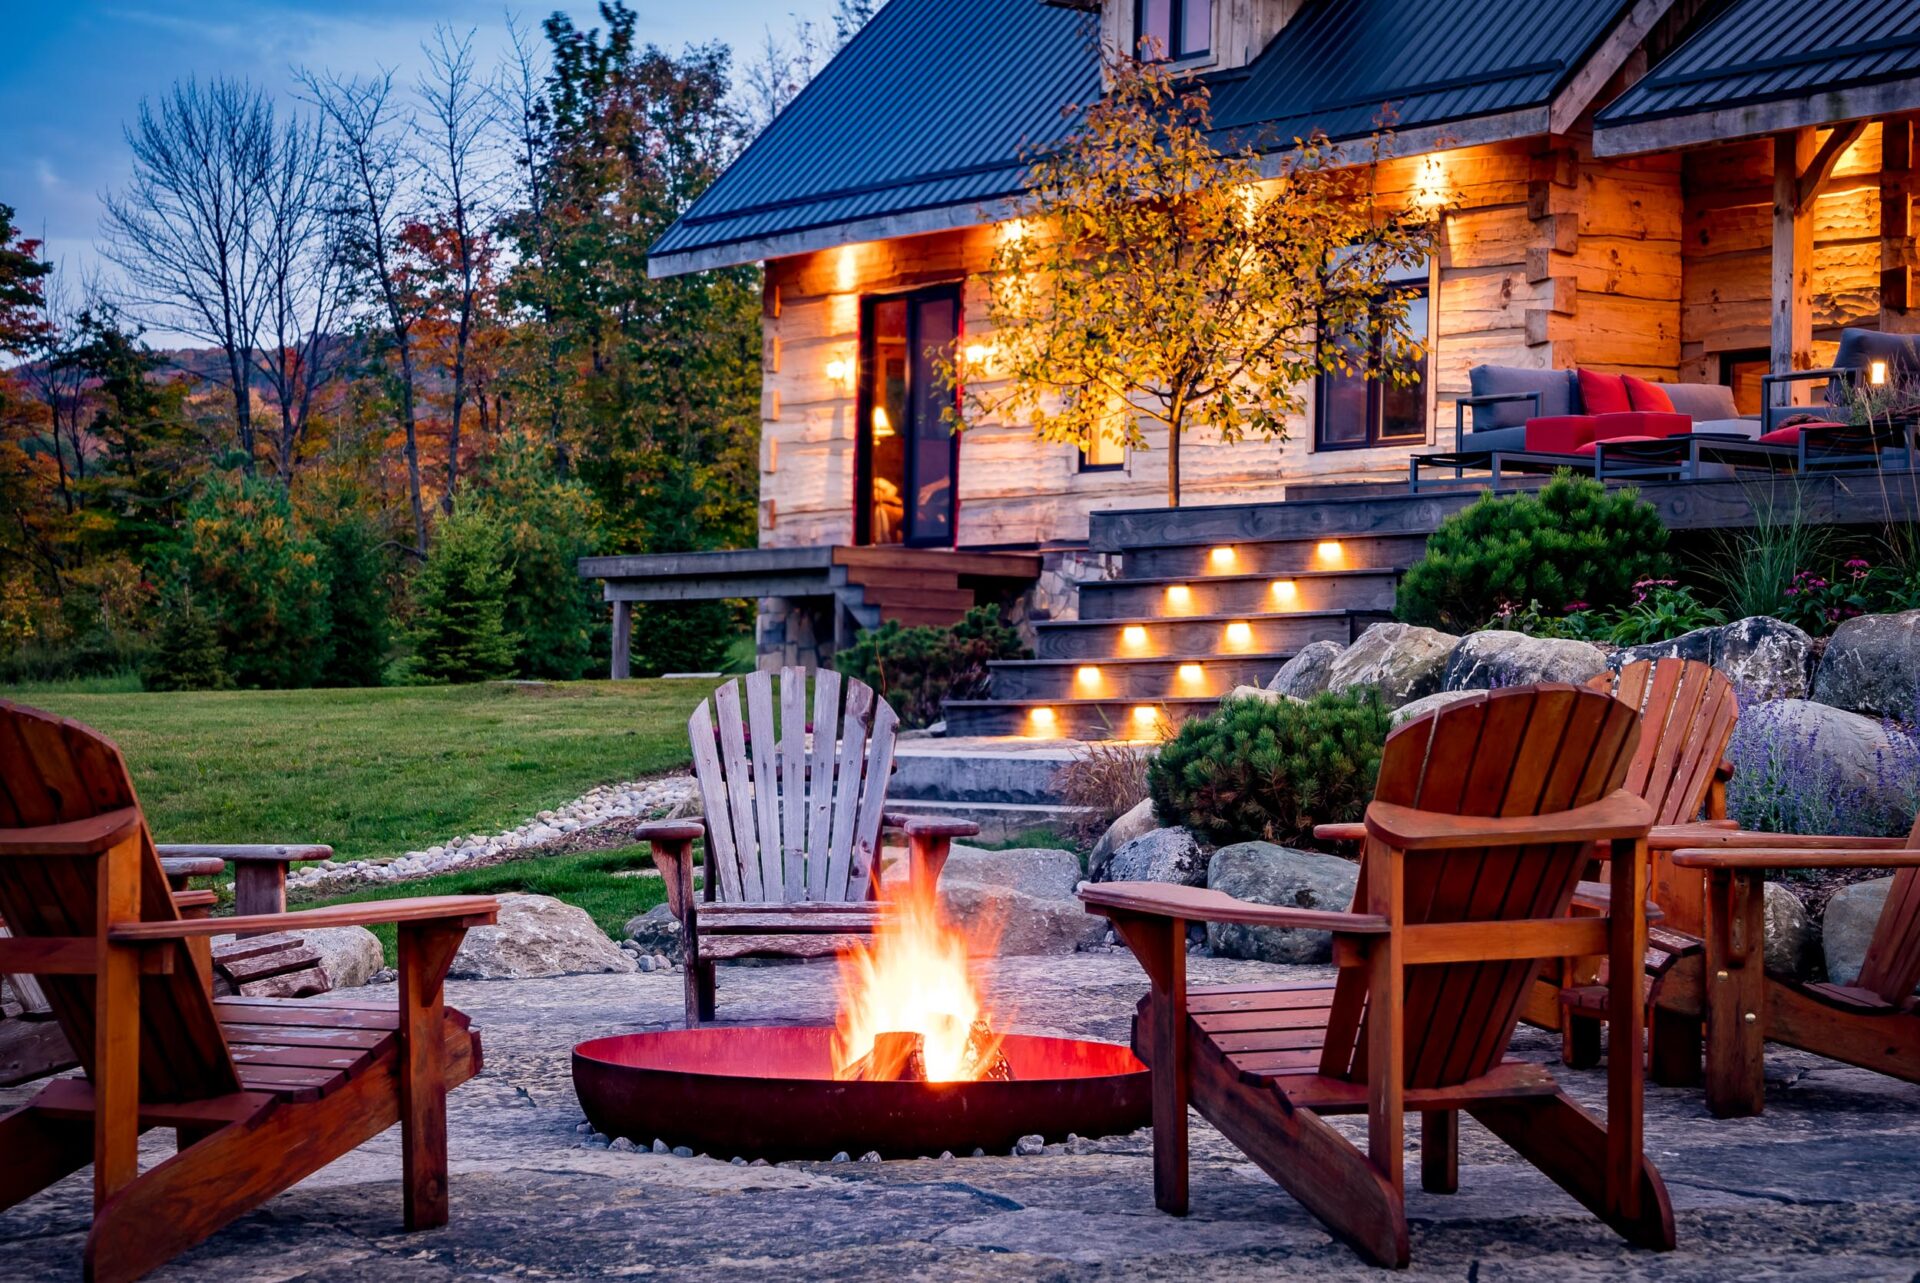 A cozy outdoor fire pit with Adirondack chairs in front of a log cabin during twilight. The steps are illuminated, enhancing the warm, inviting ambiance.